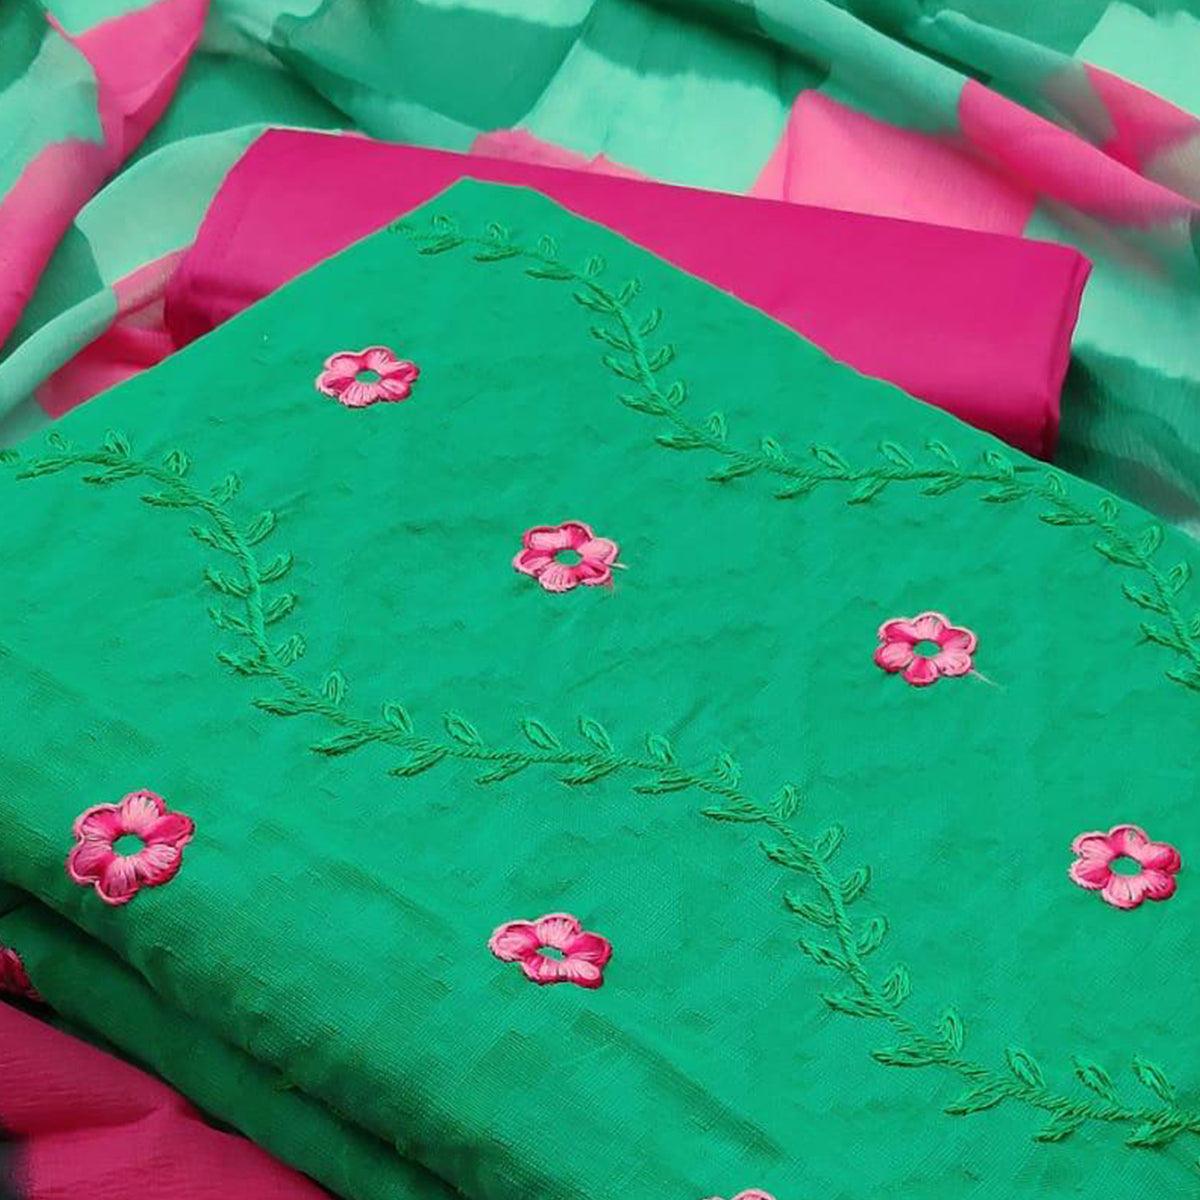 Pleasant Green Colored Casual Wear Embroidered Jacquard Dress Material - Peachmode